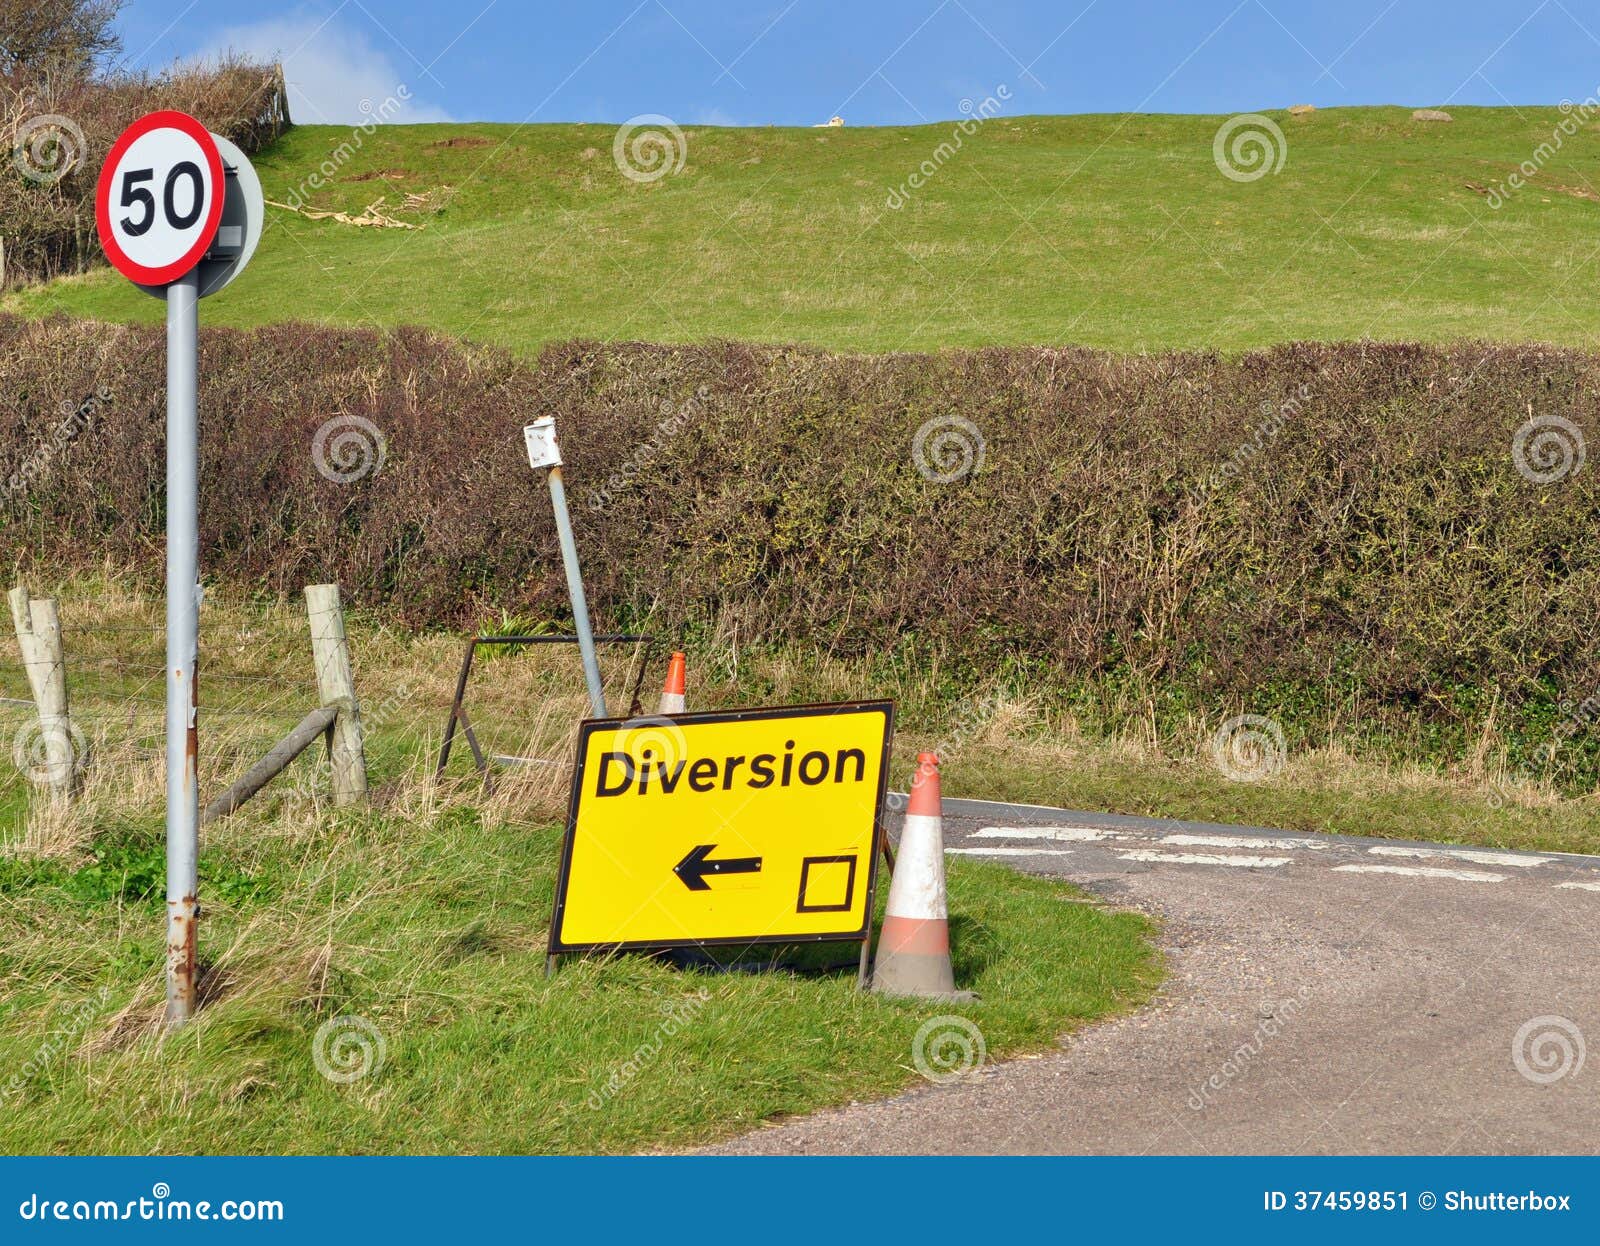 diversion sign in countryside